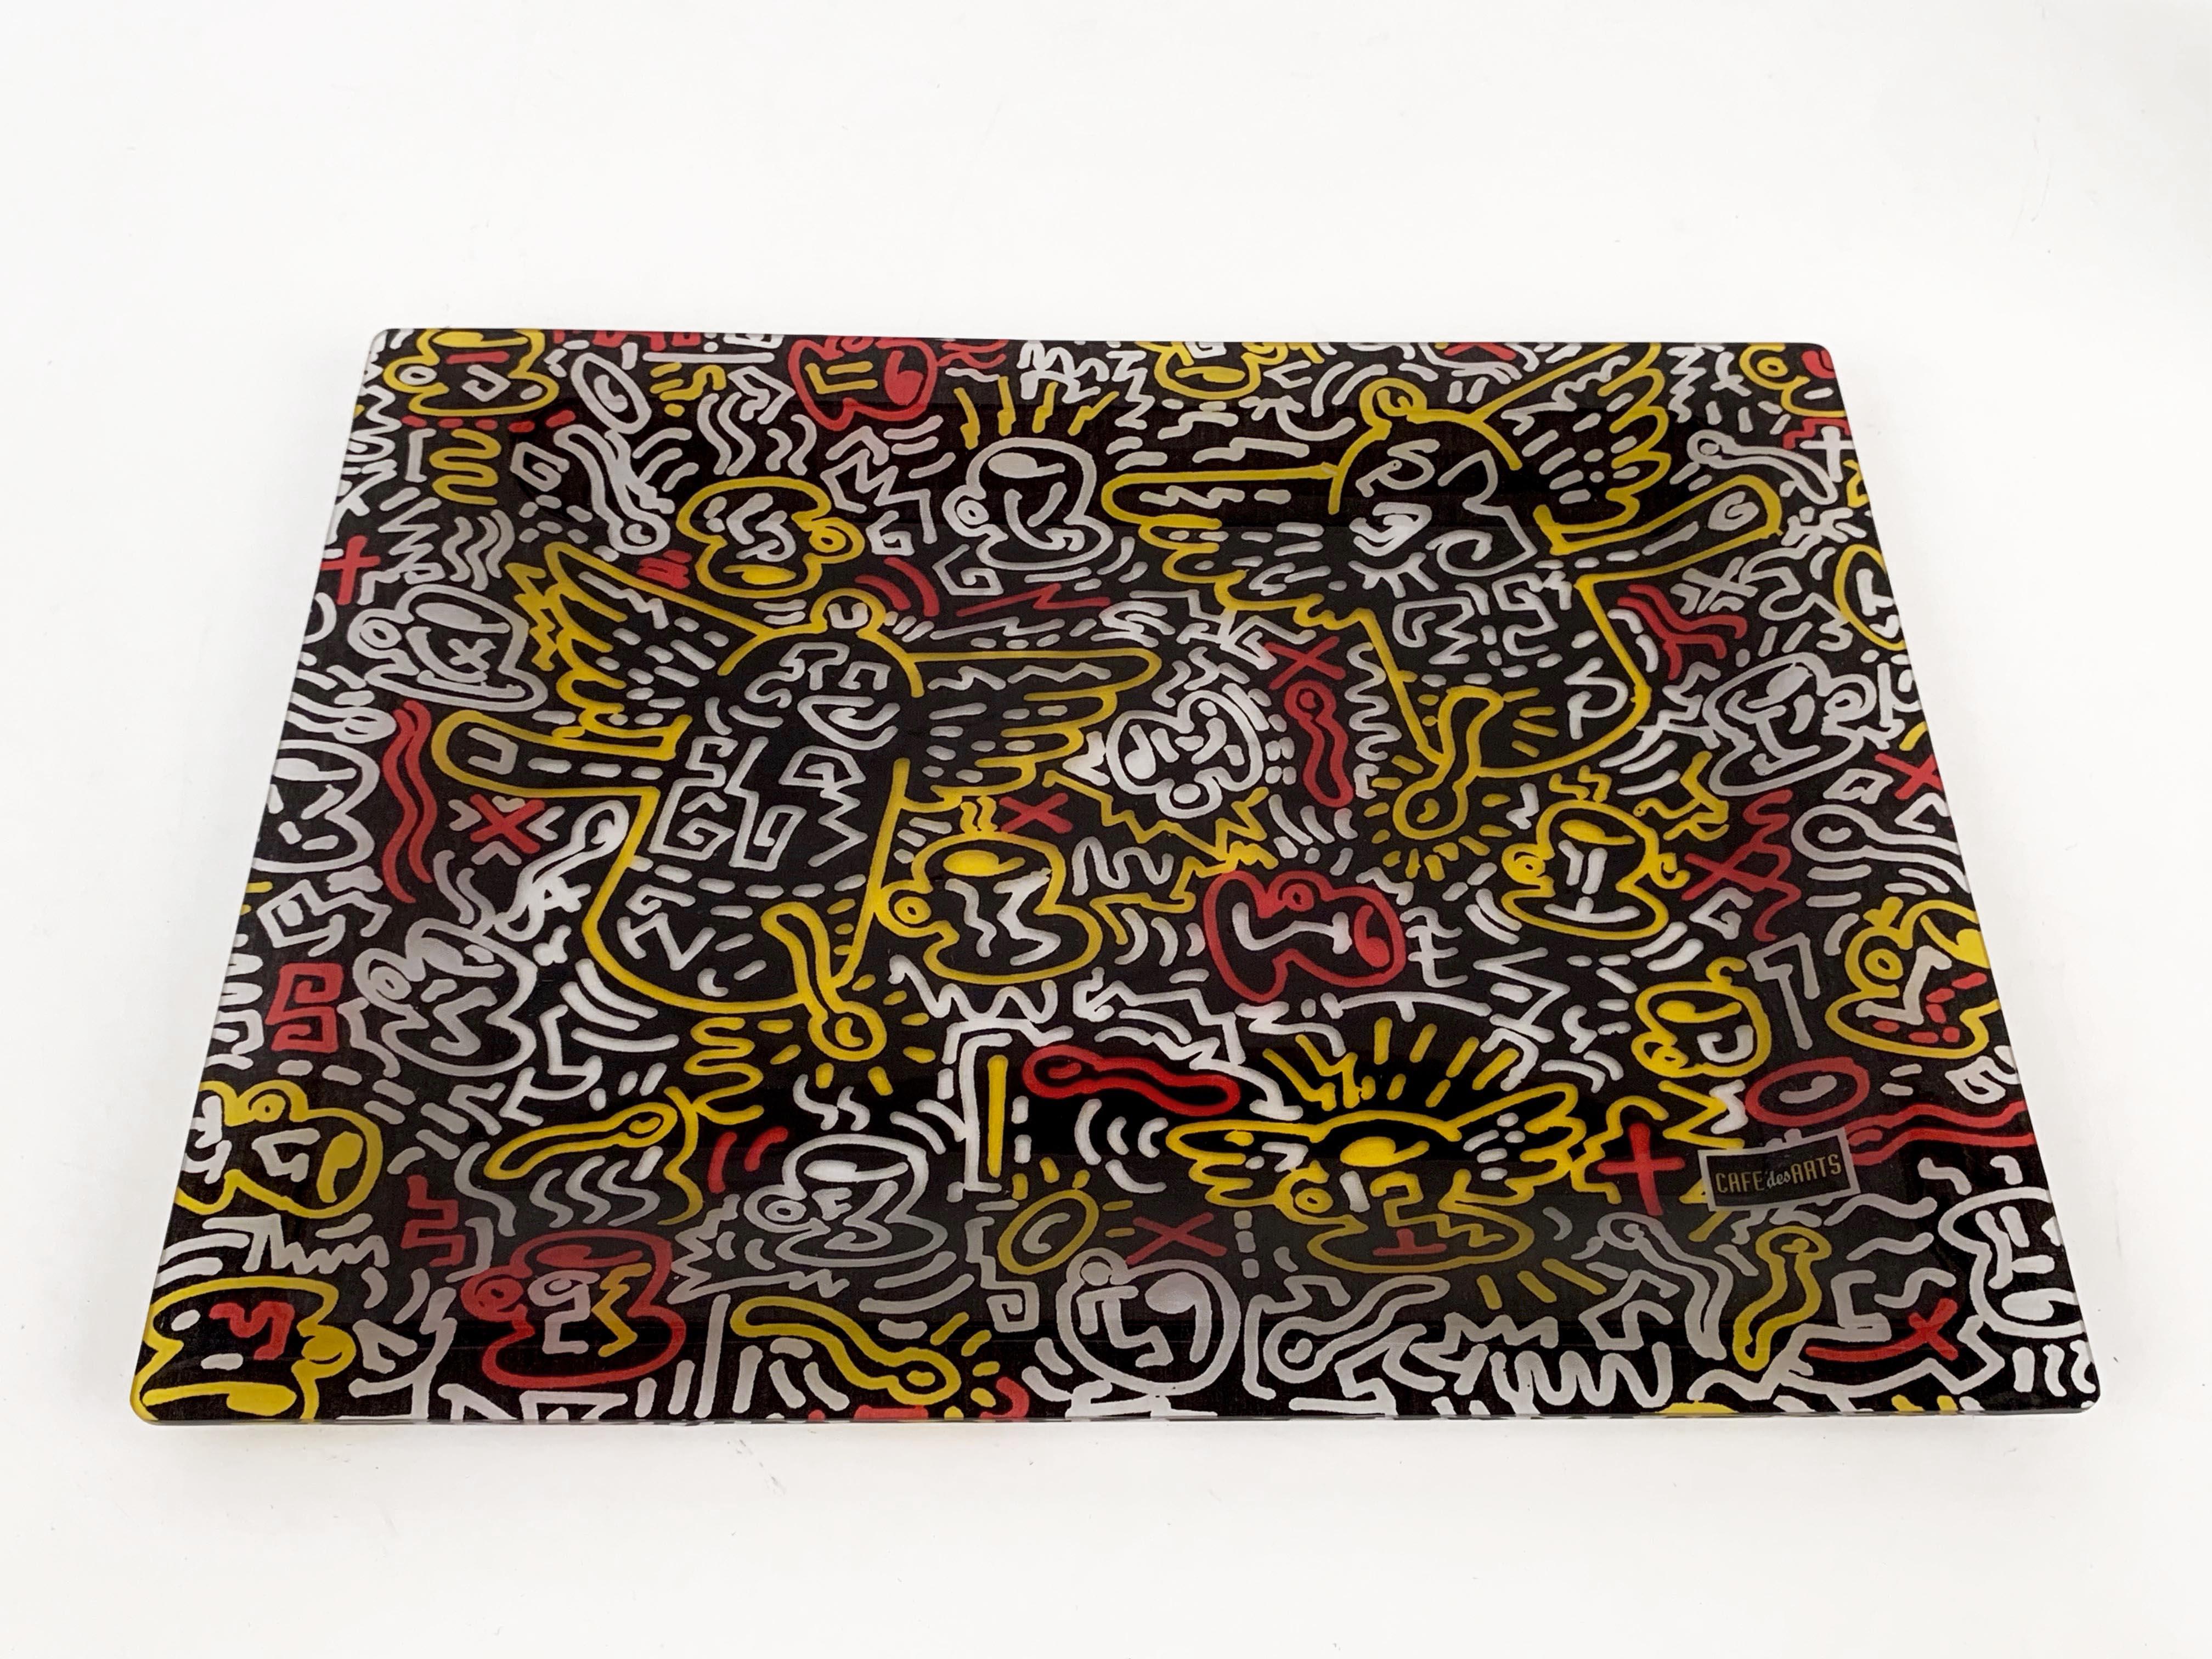 Unknown Midcentury Pop Art Keith Haring Serving Tray after design Café des Arts, 1990s